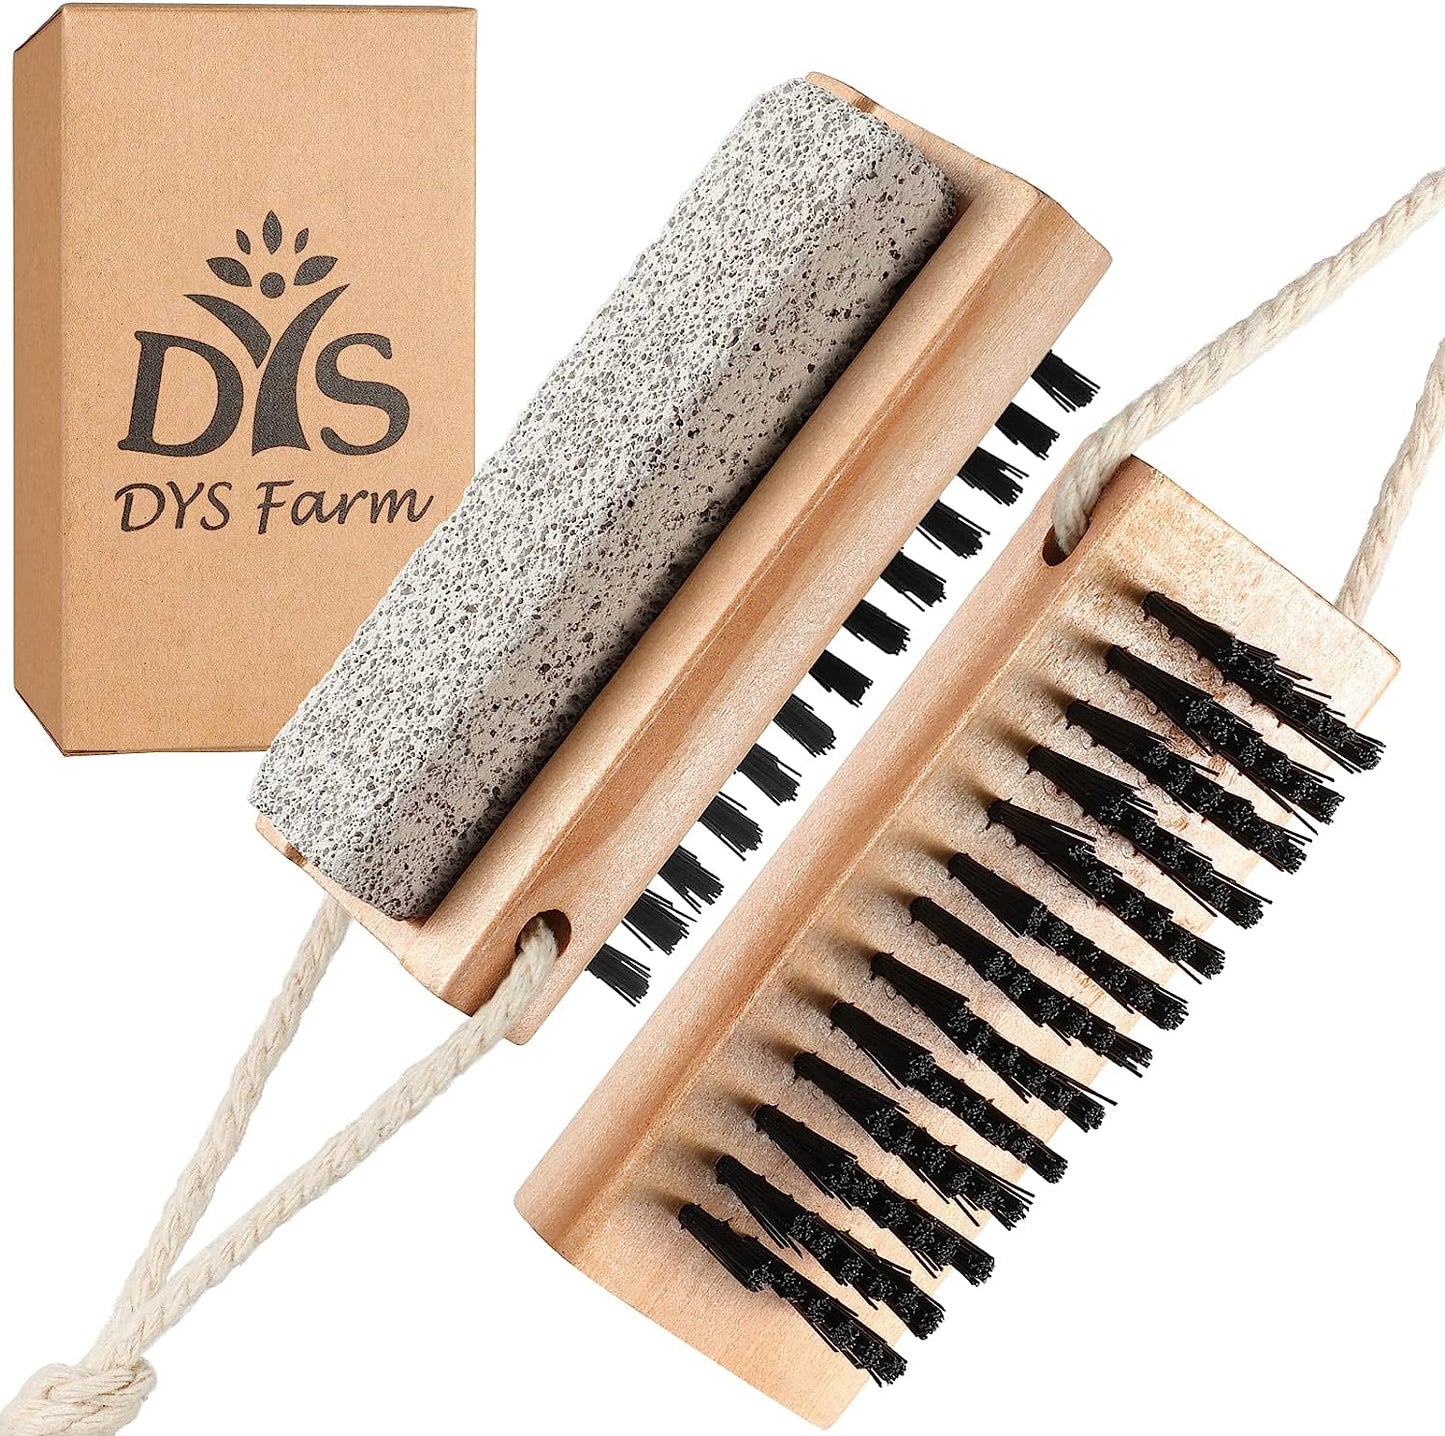 Nail Brushes for Cleaning Fingernails with Stiff Bristles - Wooden Fingernail Brush, Foot Scrubber Brush with Pumice Stone for Cleansing Exfoliating Feet and Hands, 2 In1 Manicure Pedicure Tools